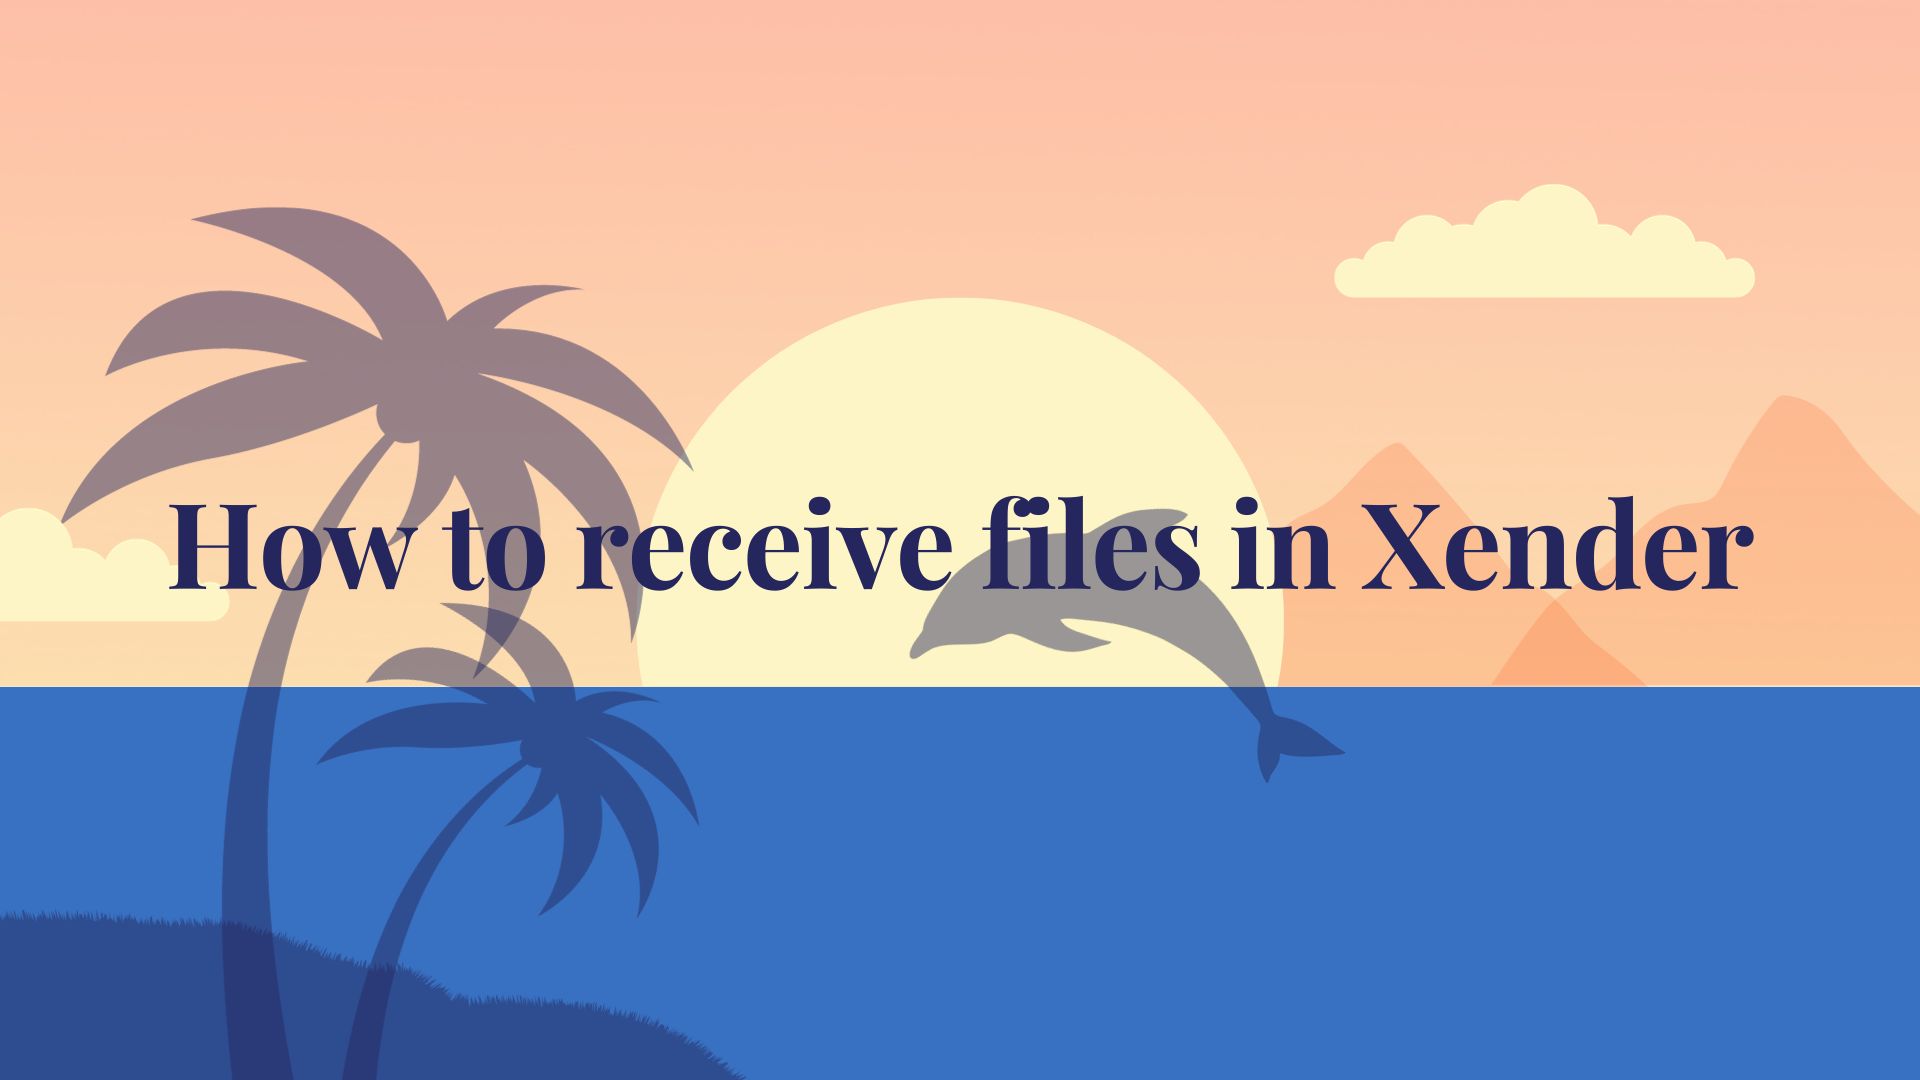 How to receive files in Xender